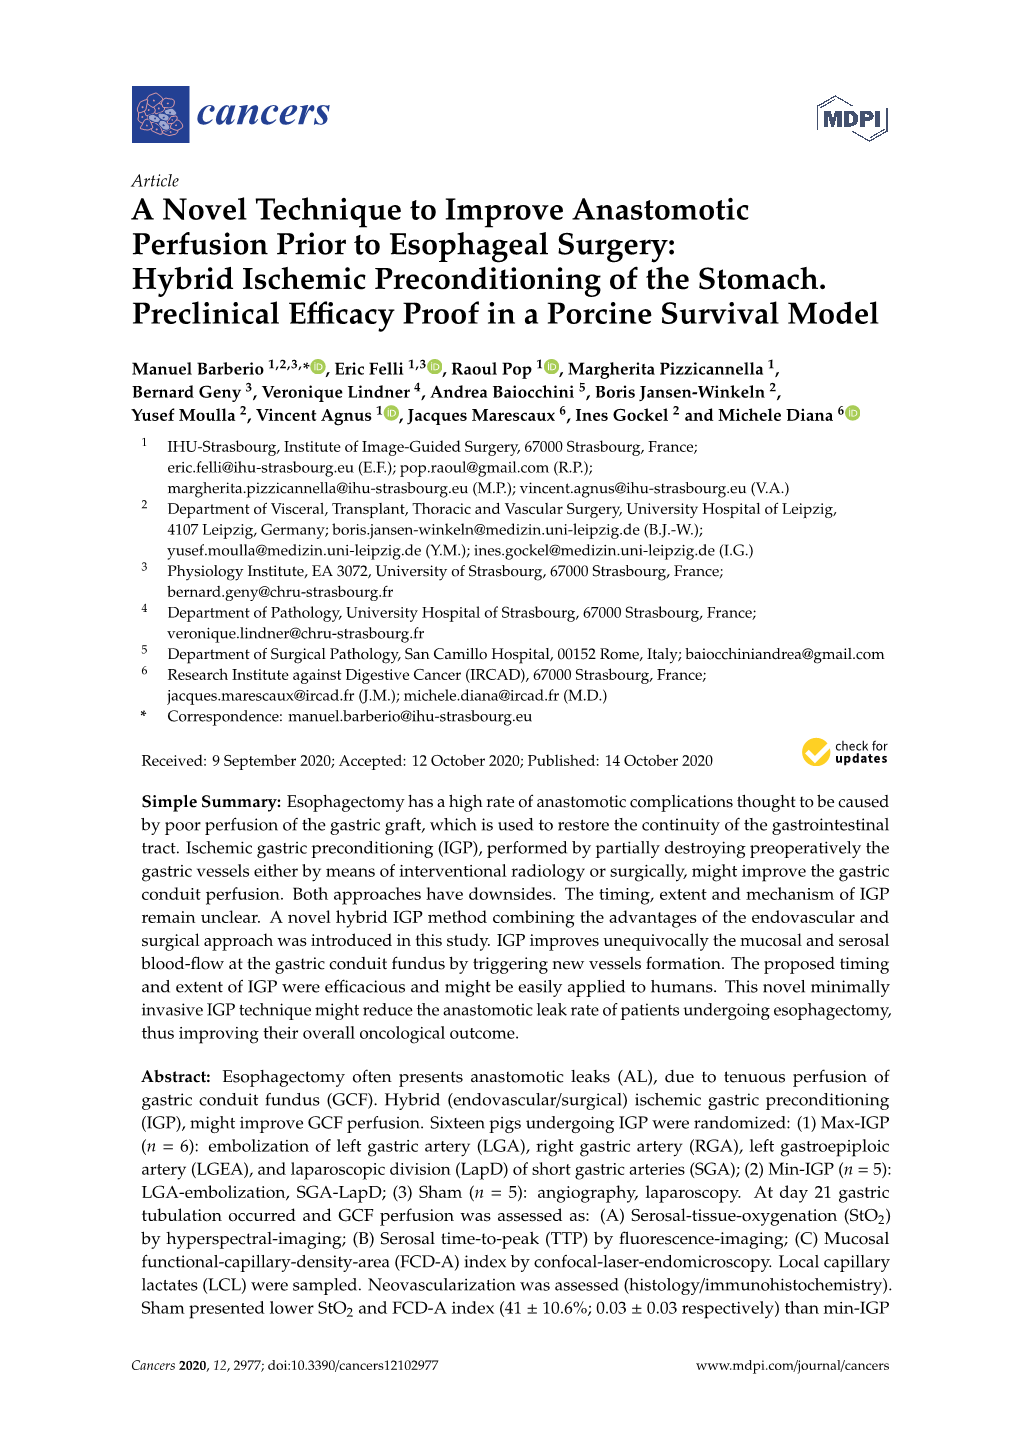 A Novel Technique to Improve Anastomotic Perfusion Prior to Esophageal Surgery: Hybrid Ischemic Preconditioning of the Stomach